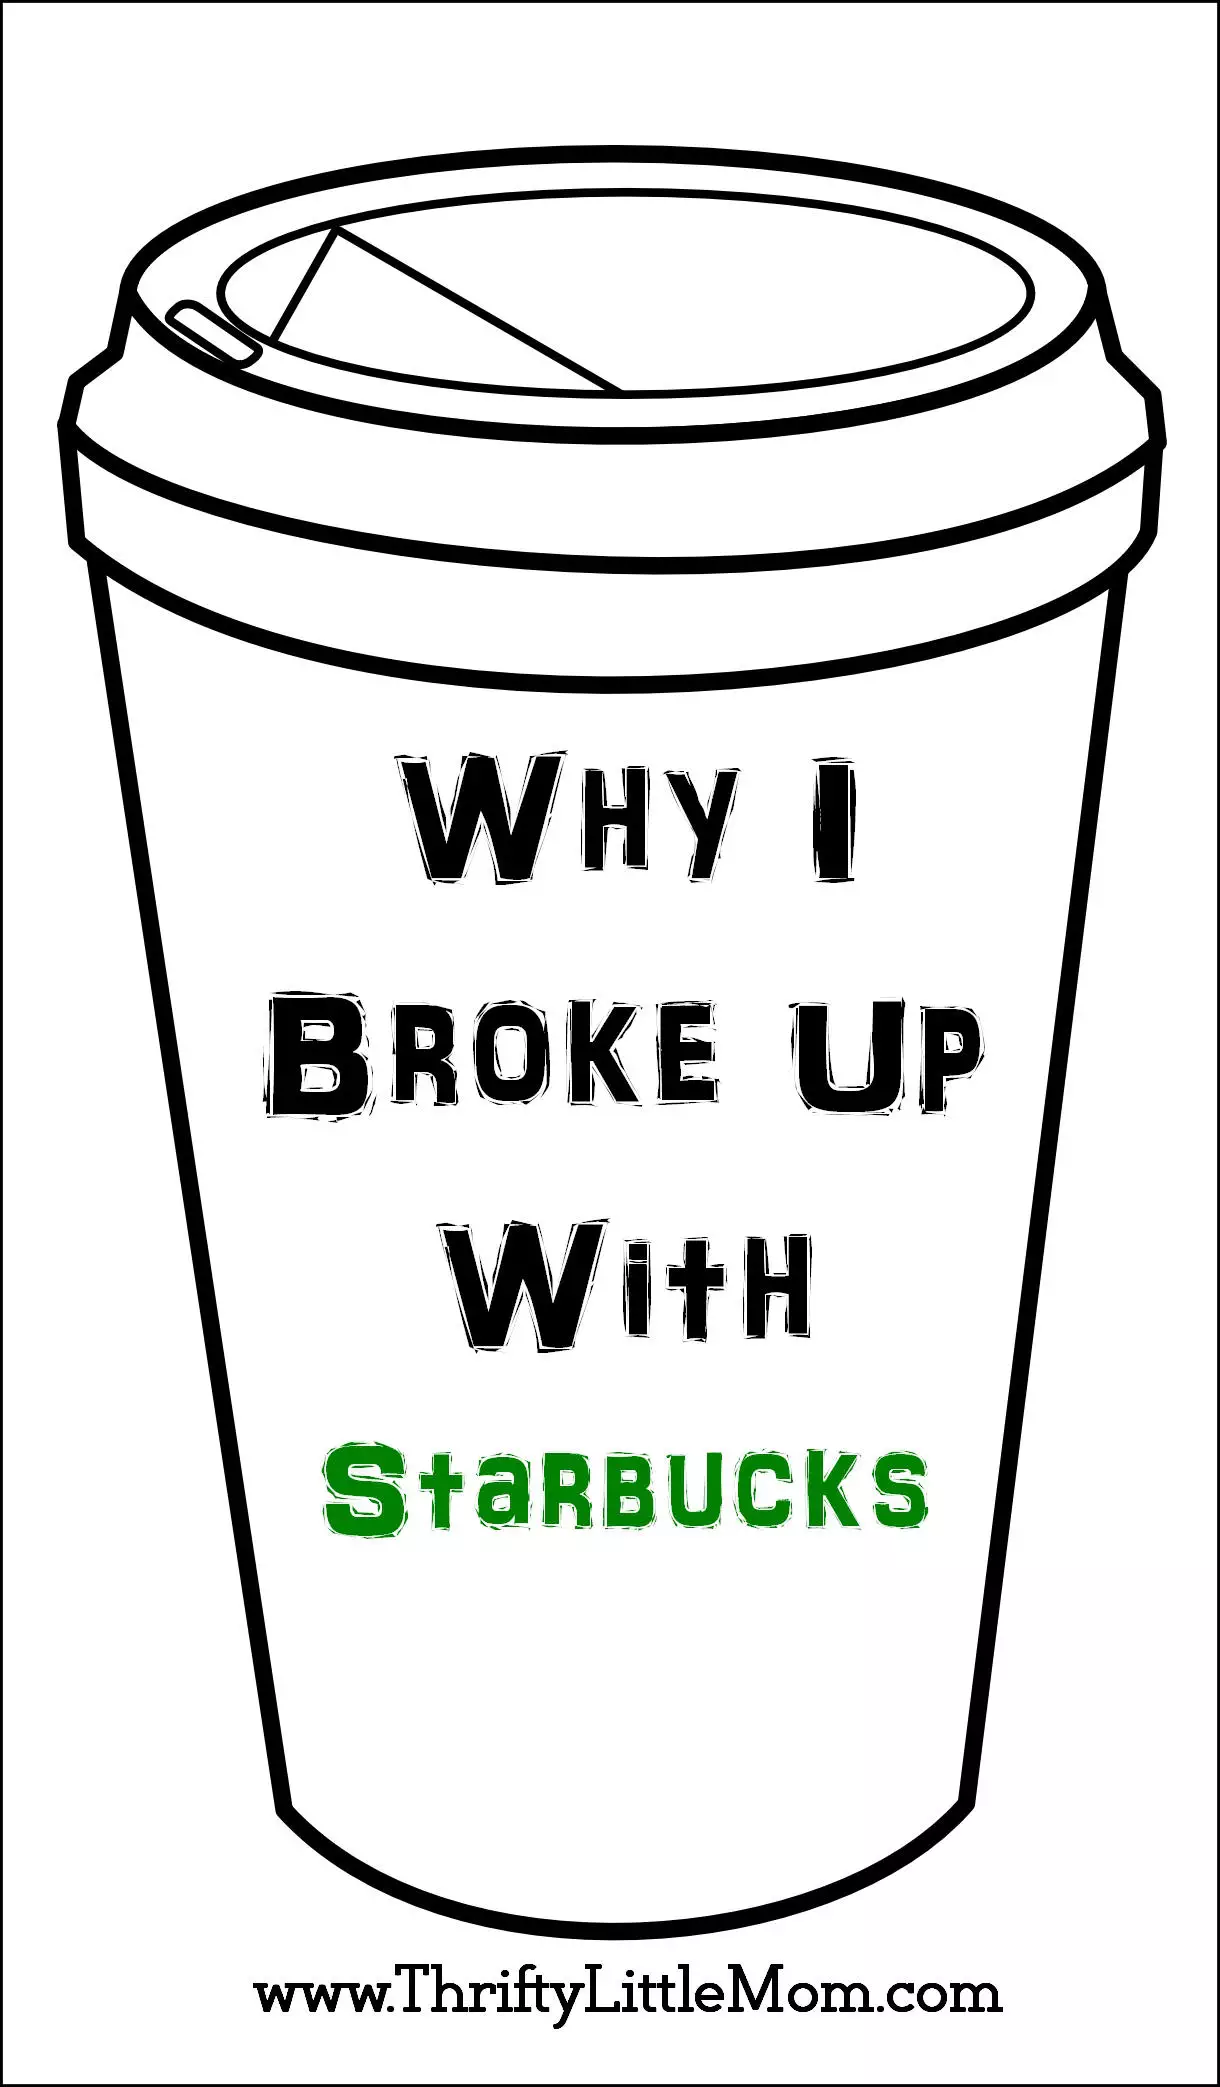 Why I broke up with Starbucks. It all came down to two things...